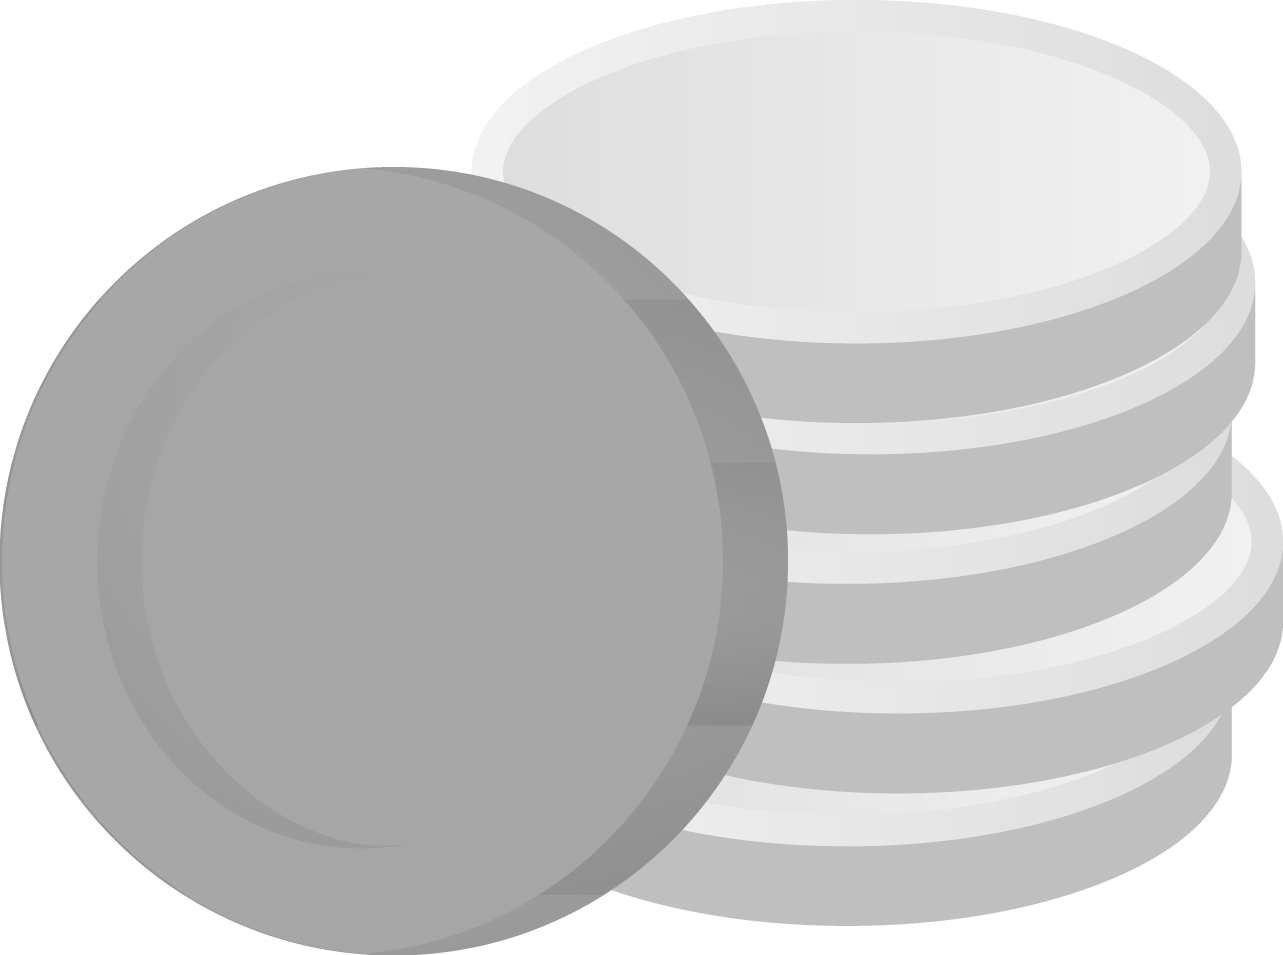 b&w10437-gamification-coins copy